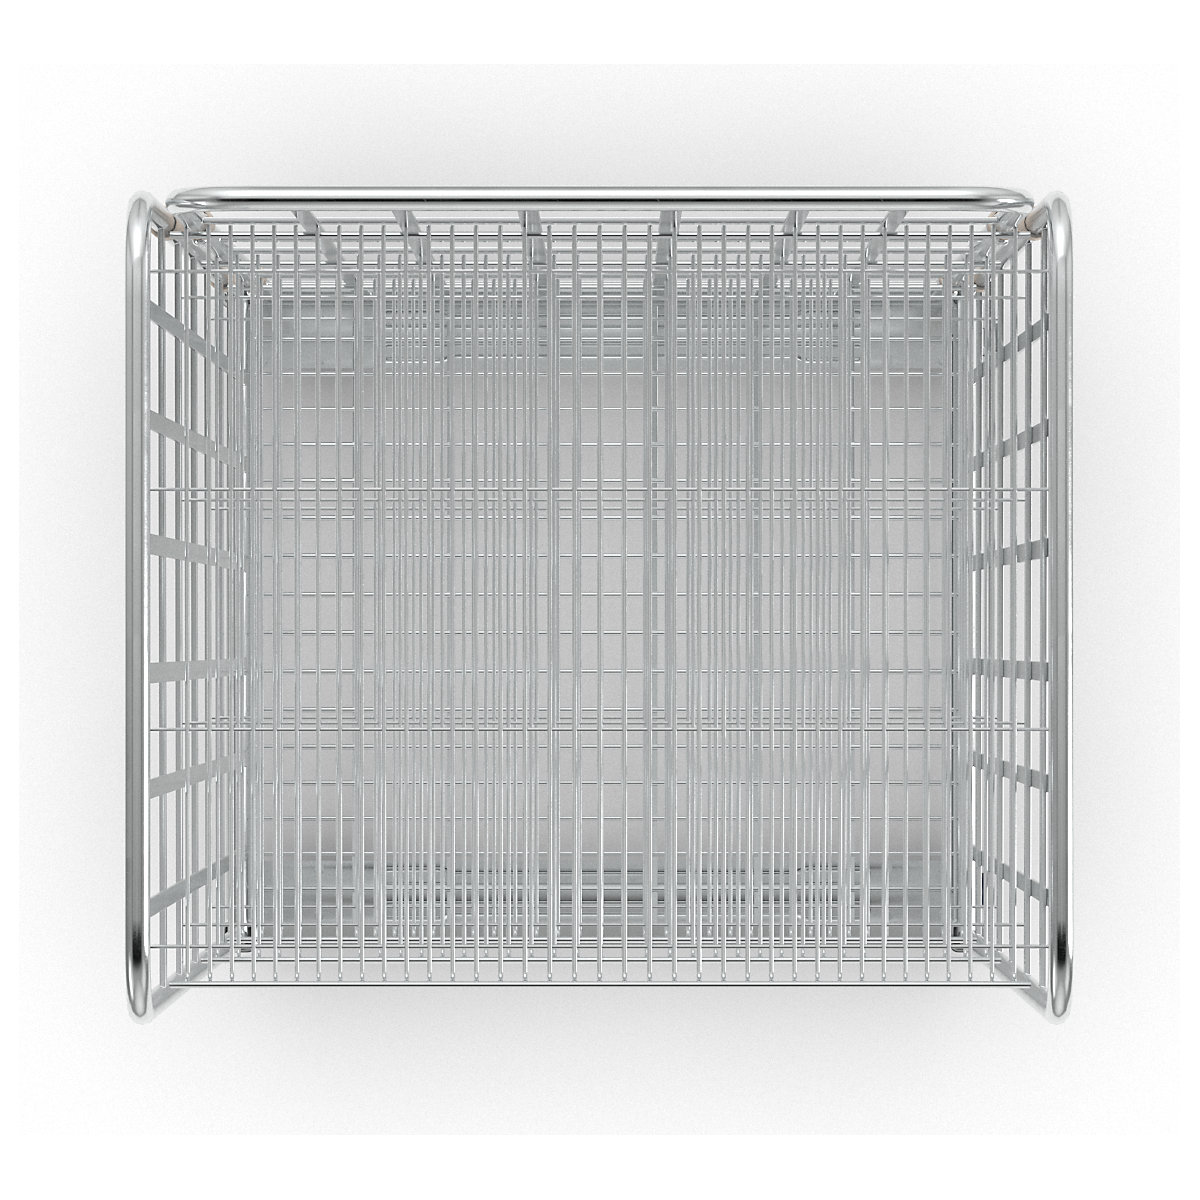 Roll cage incl. shelves (Product illustration 2)-1